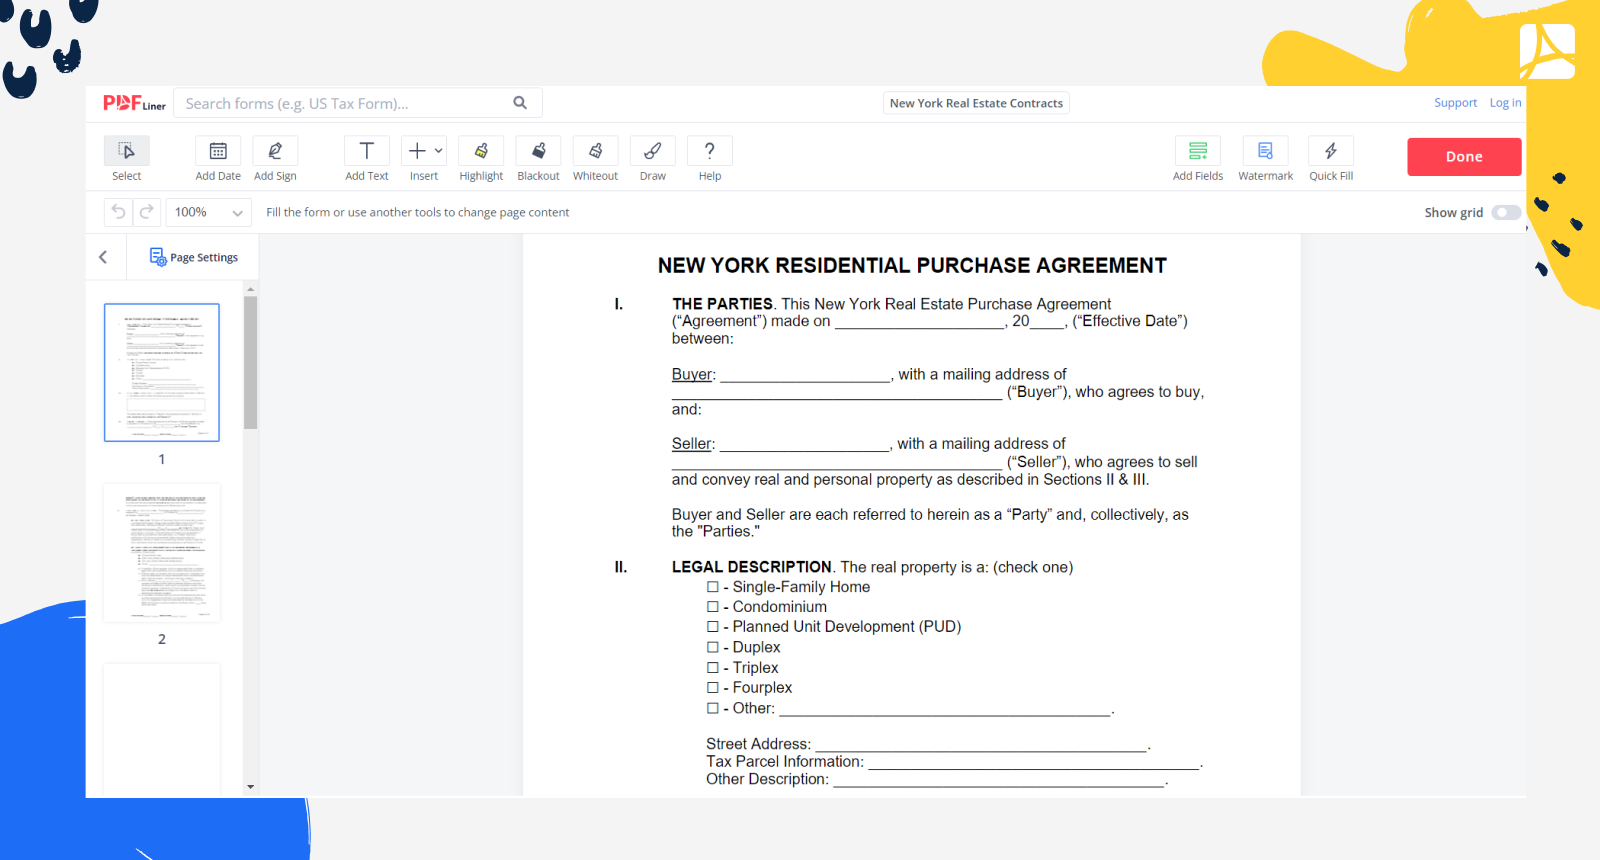 New York Real Estate Contracts Form Screenshot